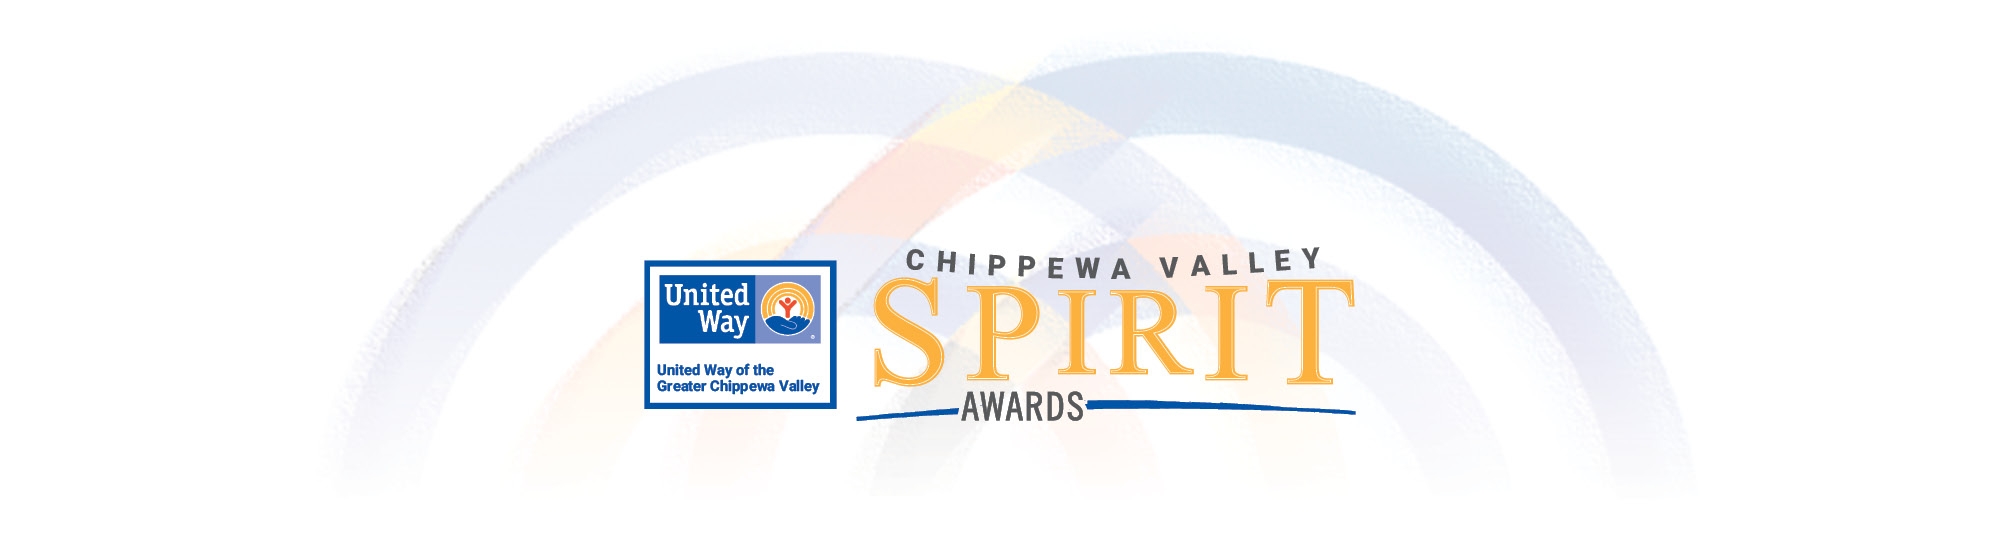 Header for Chippewa Valley Spirit Awards with logo